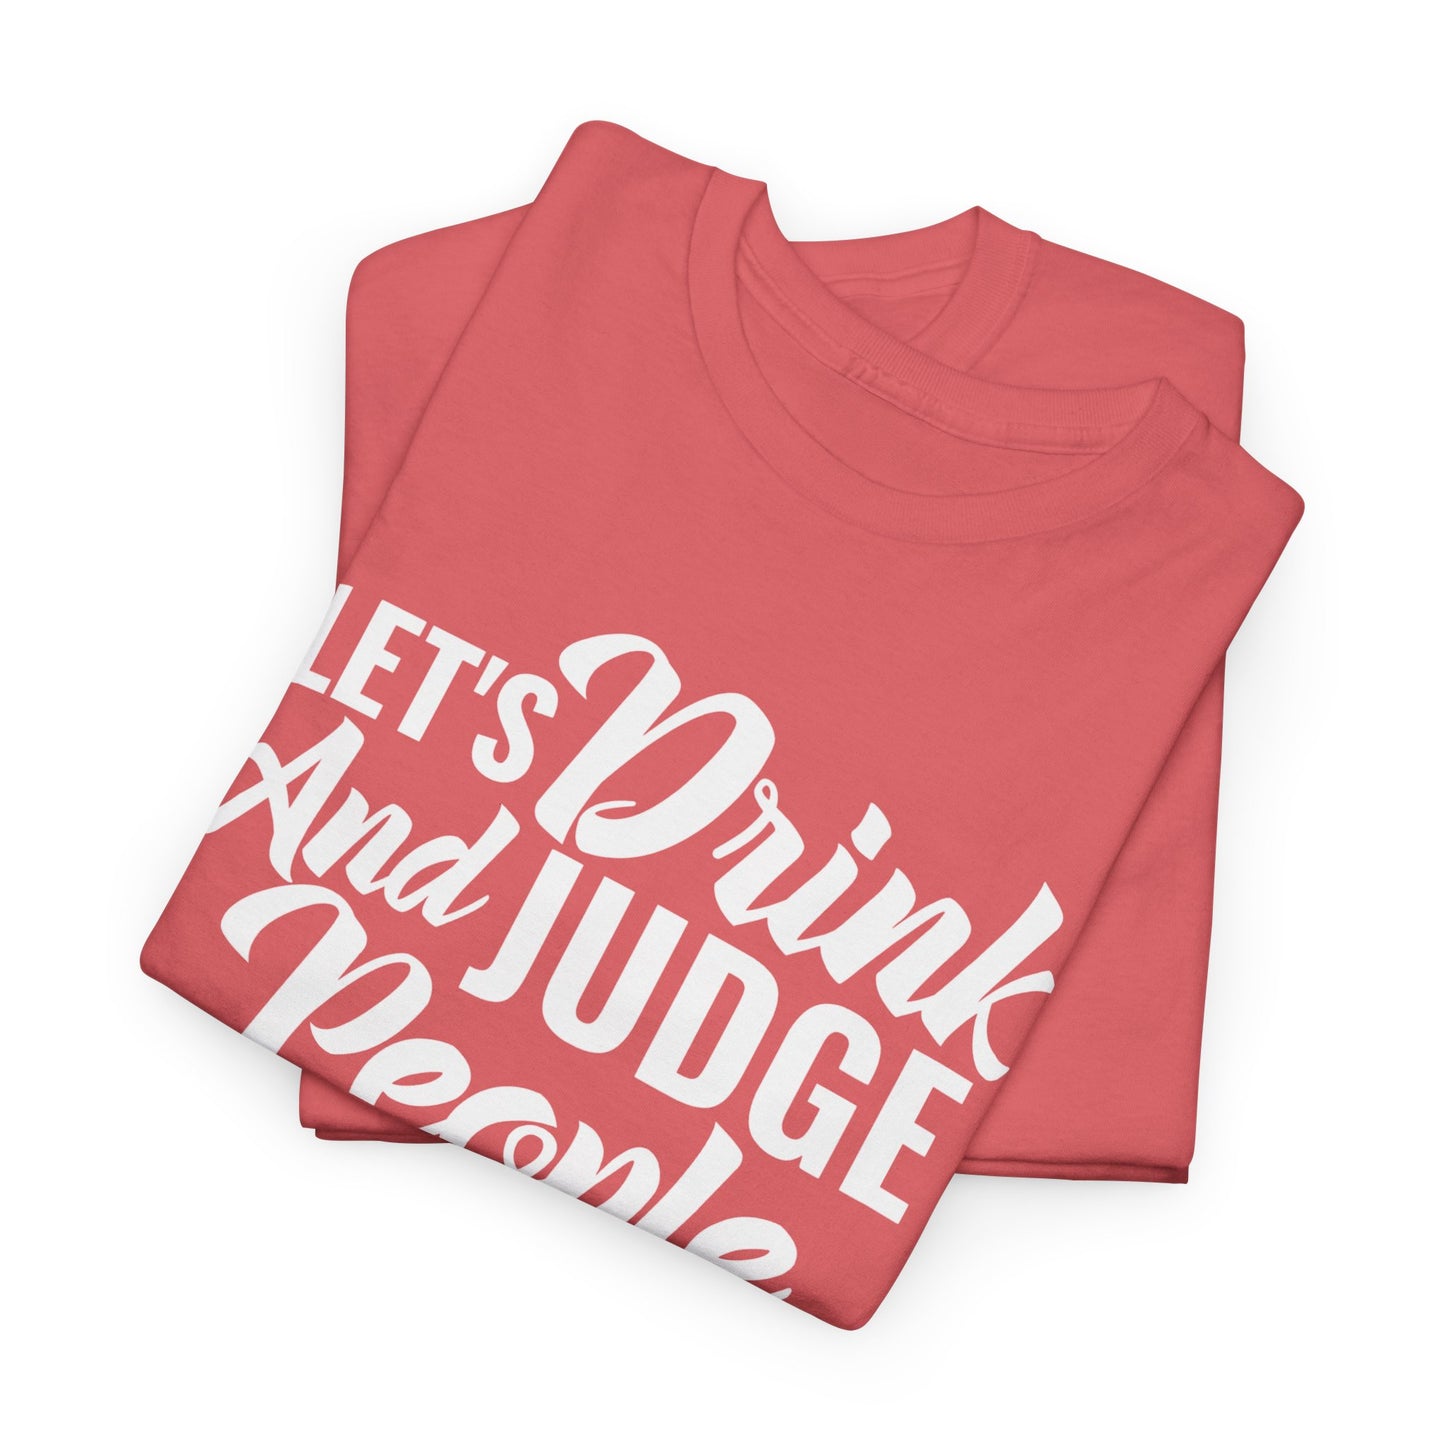 Drunk and Judgy - Craftee Designs & Prints 